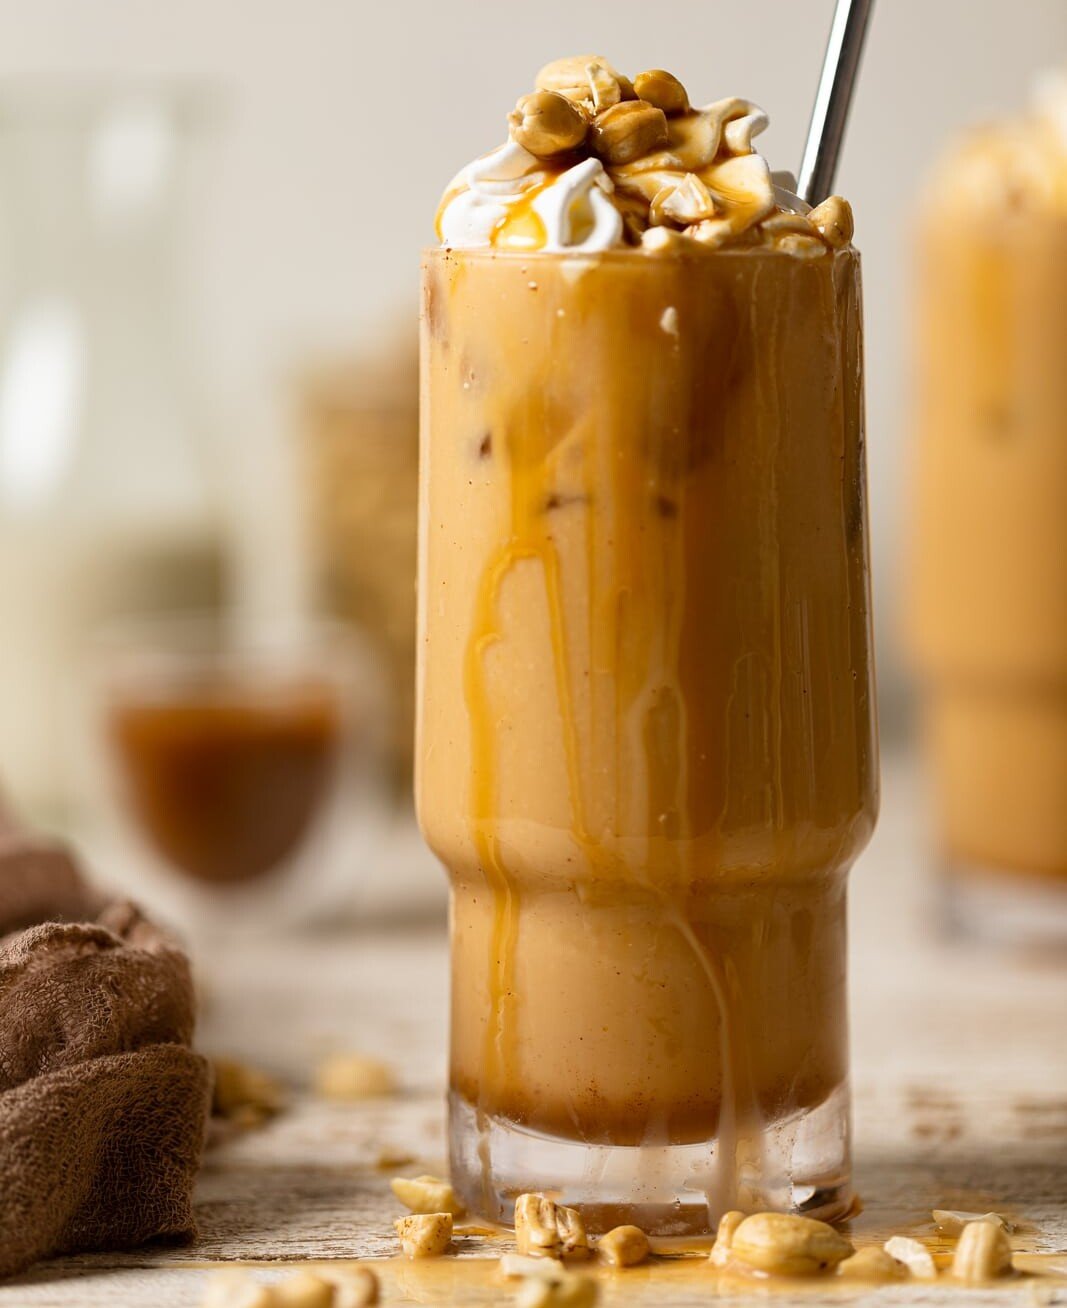 Salted Caramel Cashew Latte in a tall glass with caramel dripping down the side